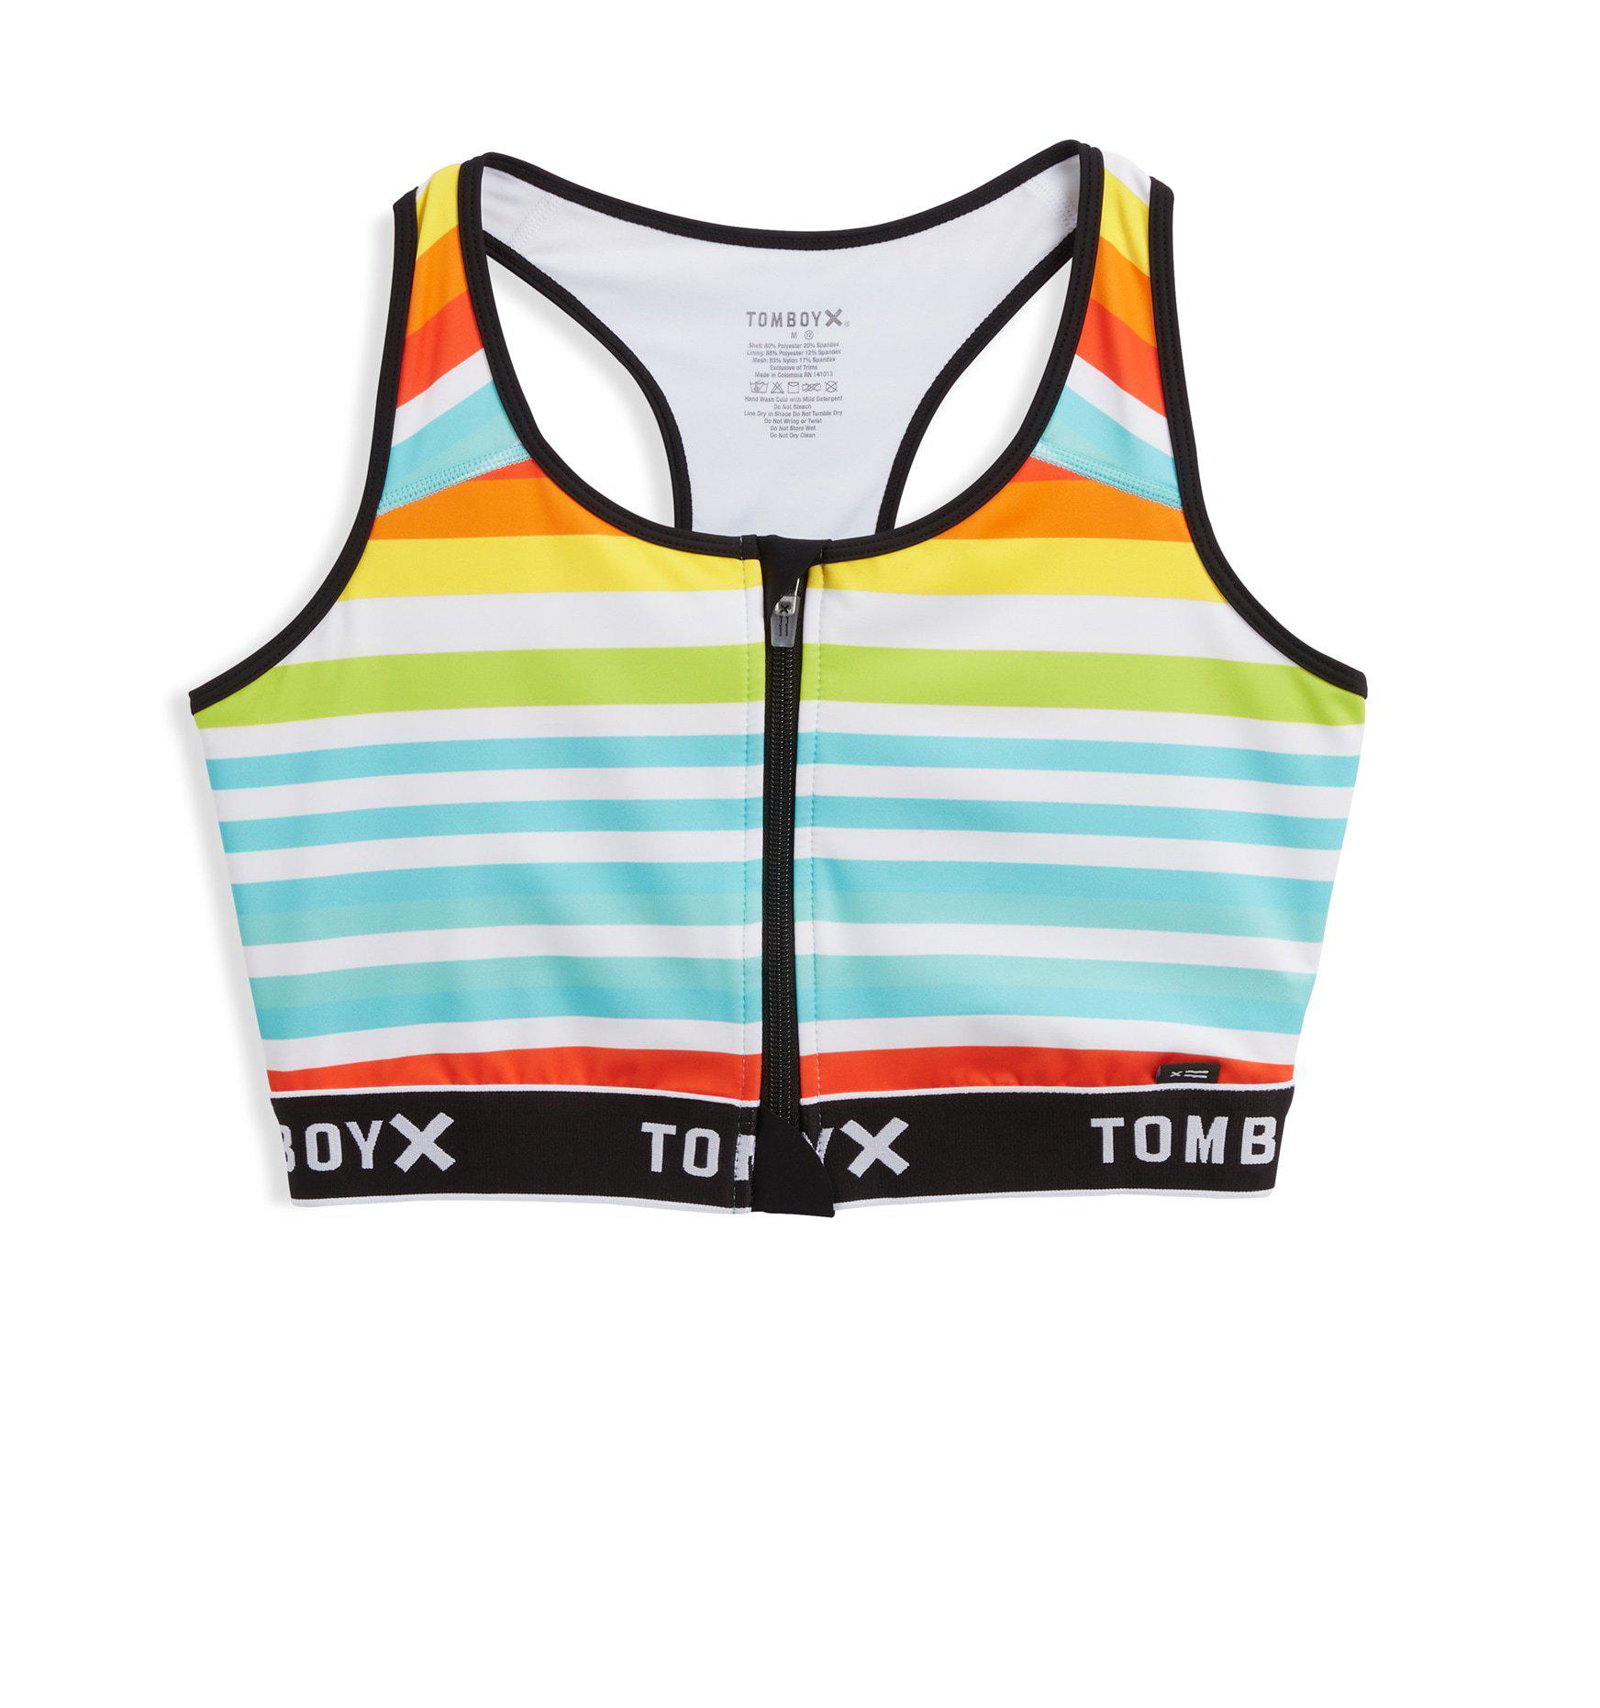 TomboyX: Your Must Have Swim Items are Back